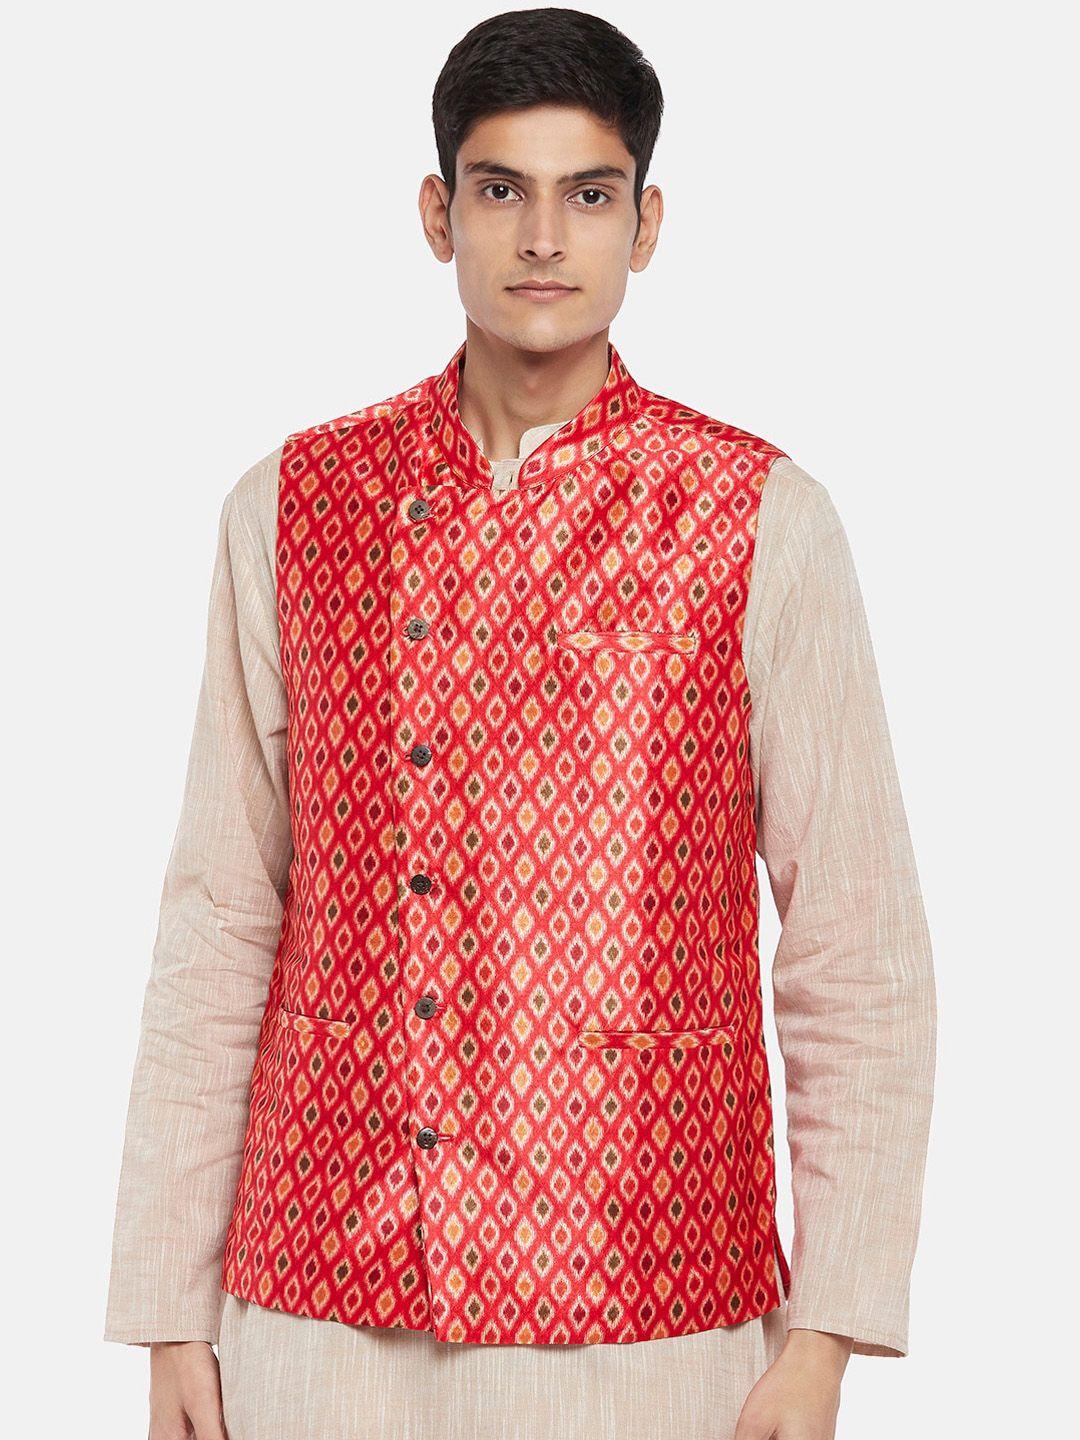 indus-route-by-pantaloons-men-coral-woven-design-nehru-jacket